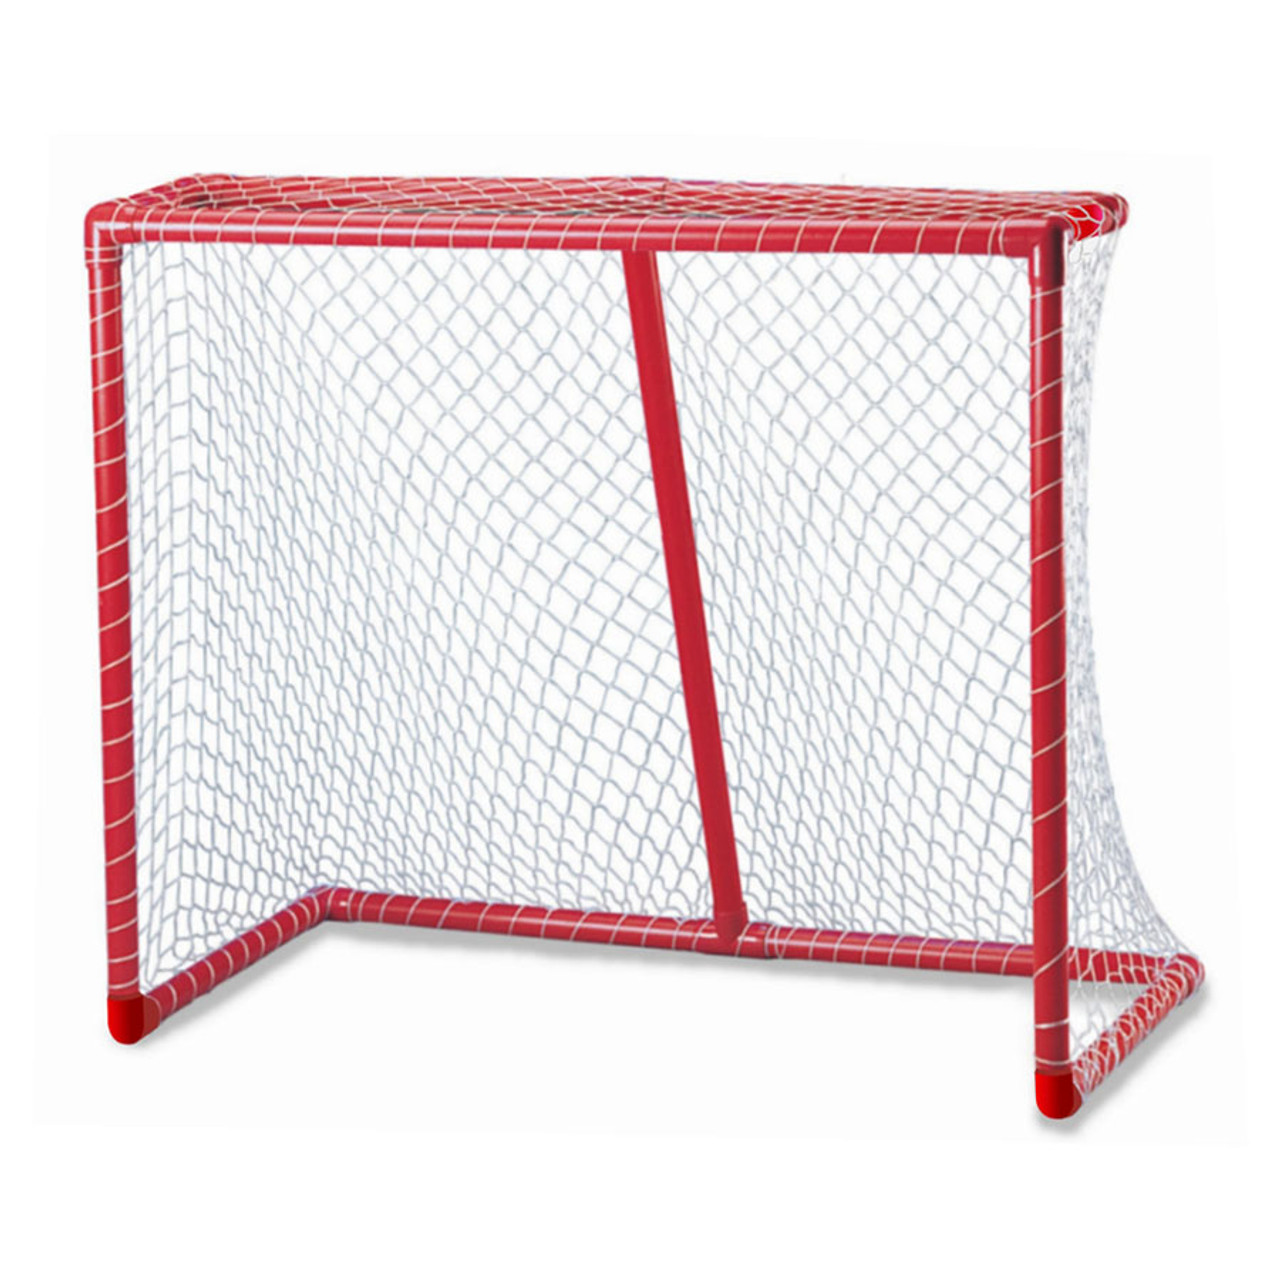 Replacement Netting for F1400 Goal Frame